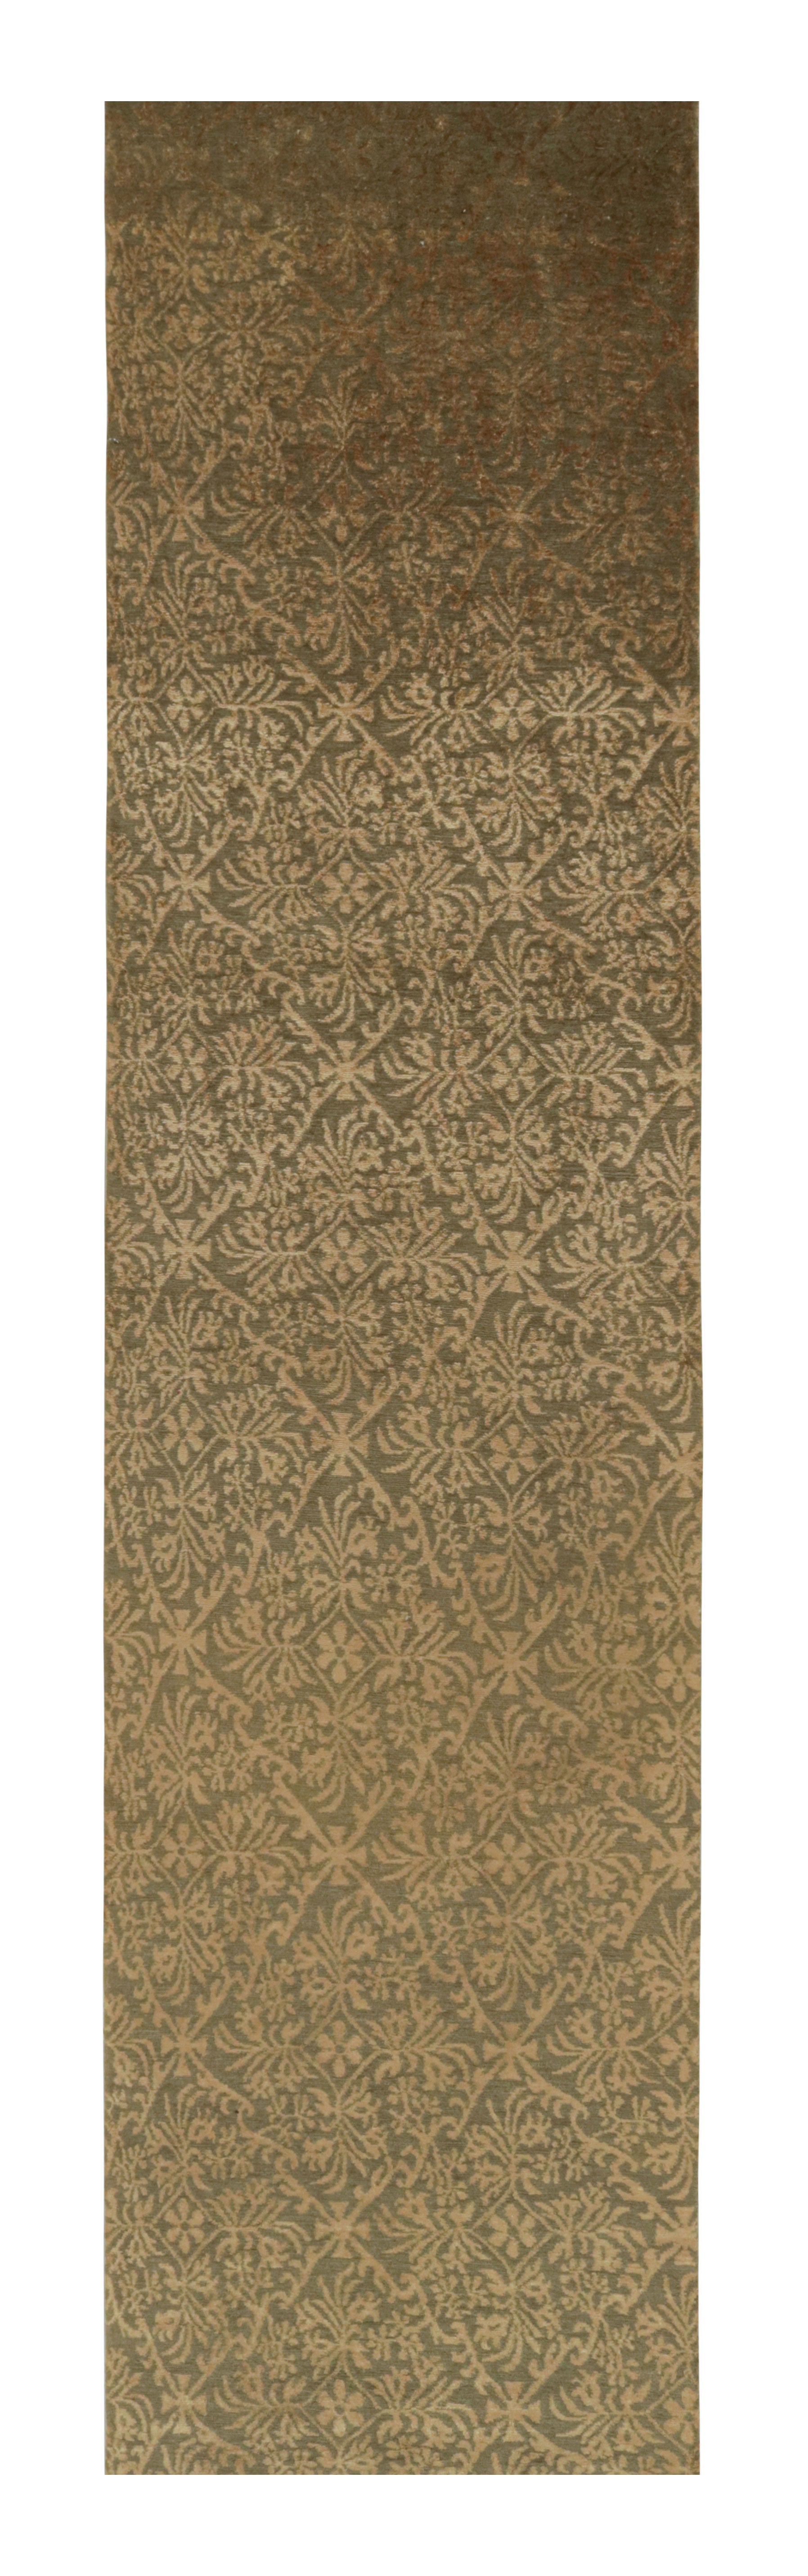 Rug & Kilim’s European Style Runner Rug in Green and Gold Florals “Cordoba”